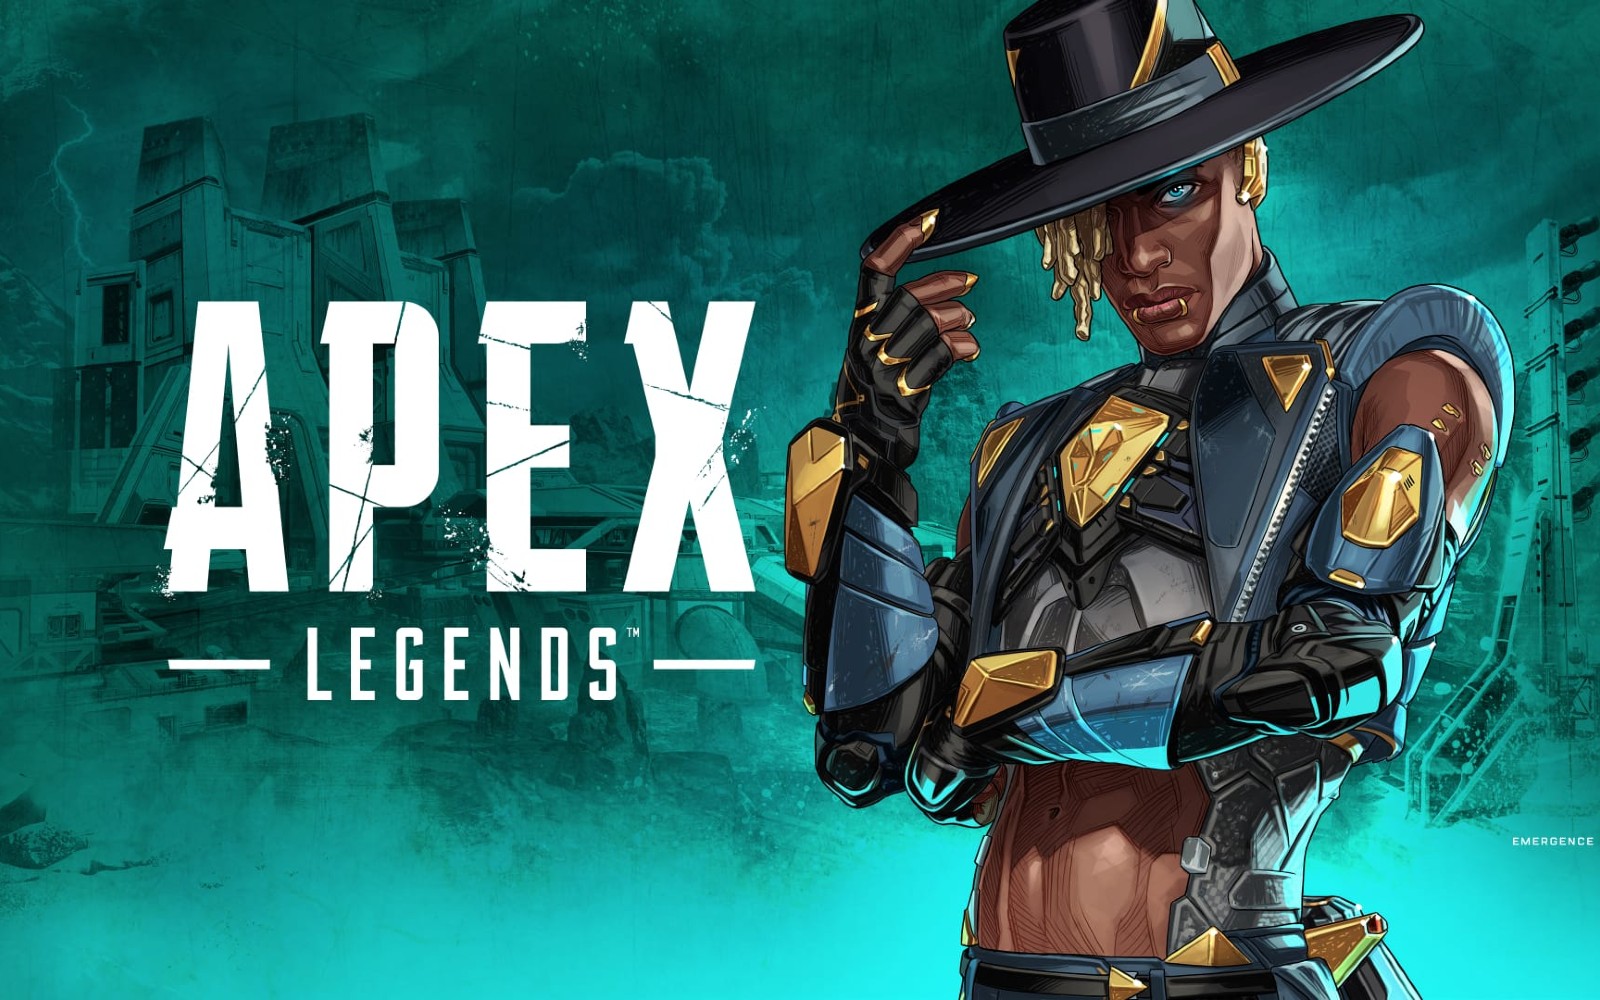 'Apex Legends' Emergence trailer shows off new playable character Seer